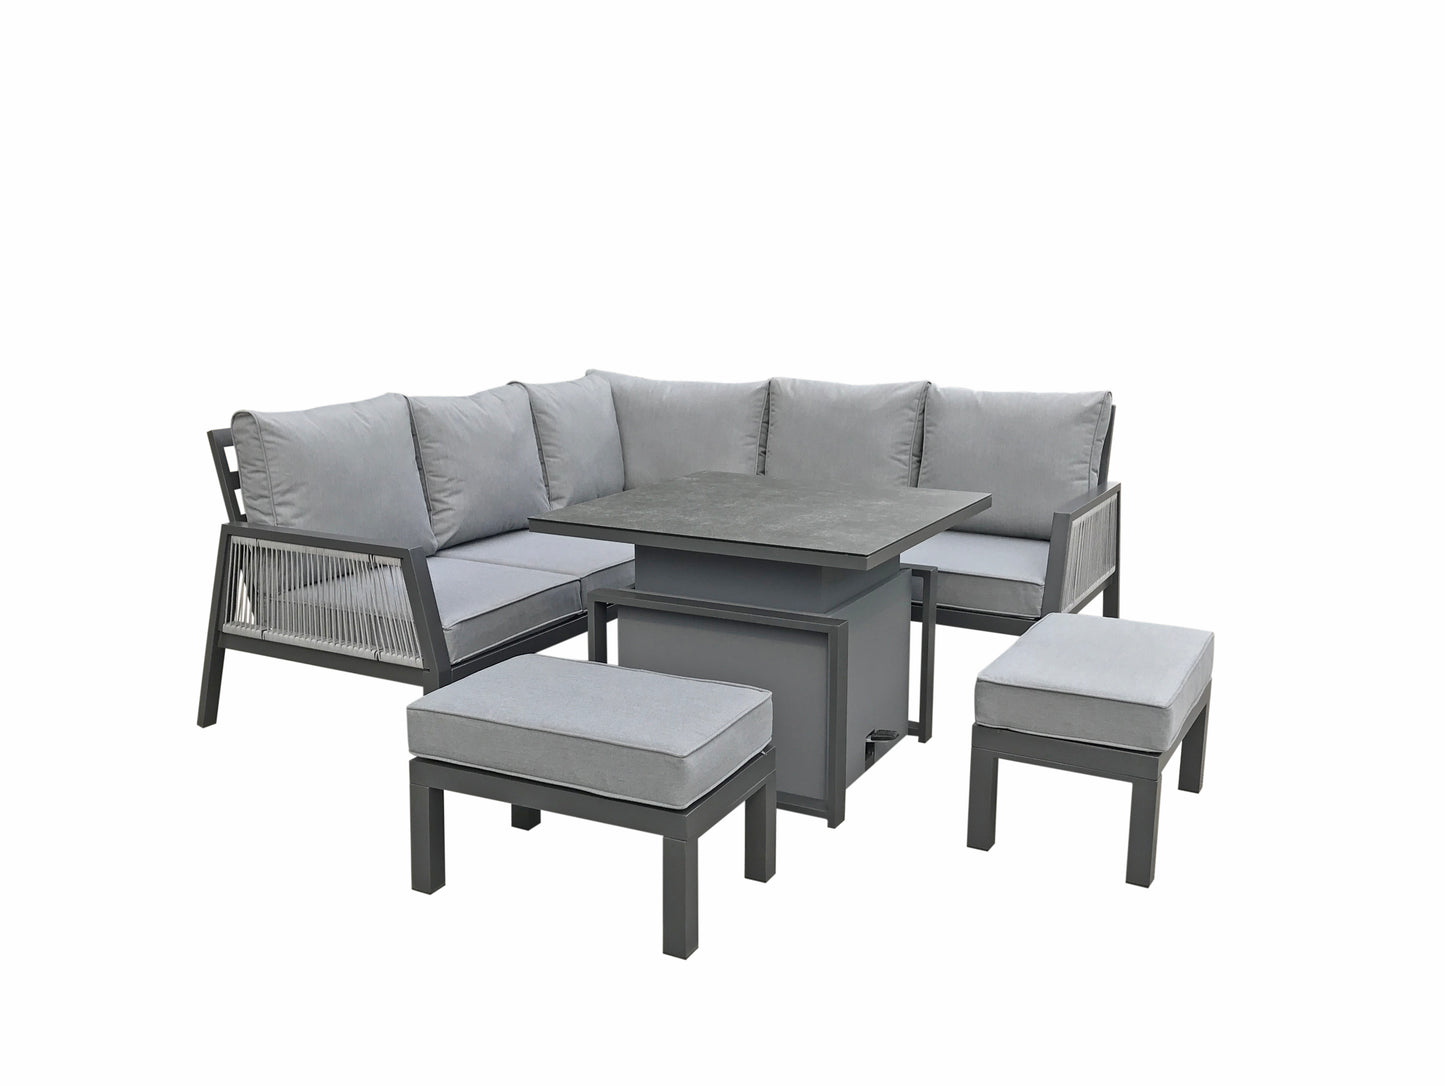 Signature Weave - Bettina corner sofa with 2 benches in Grey powder coat with gas lift table - Beyond outdoor living